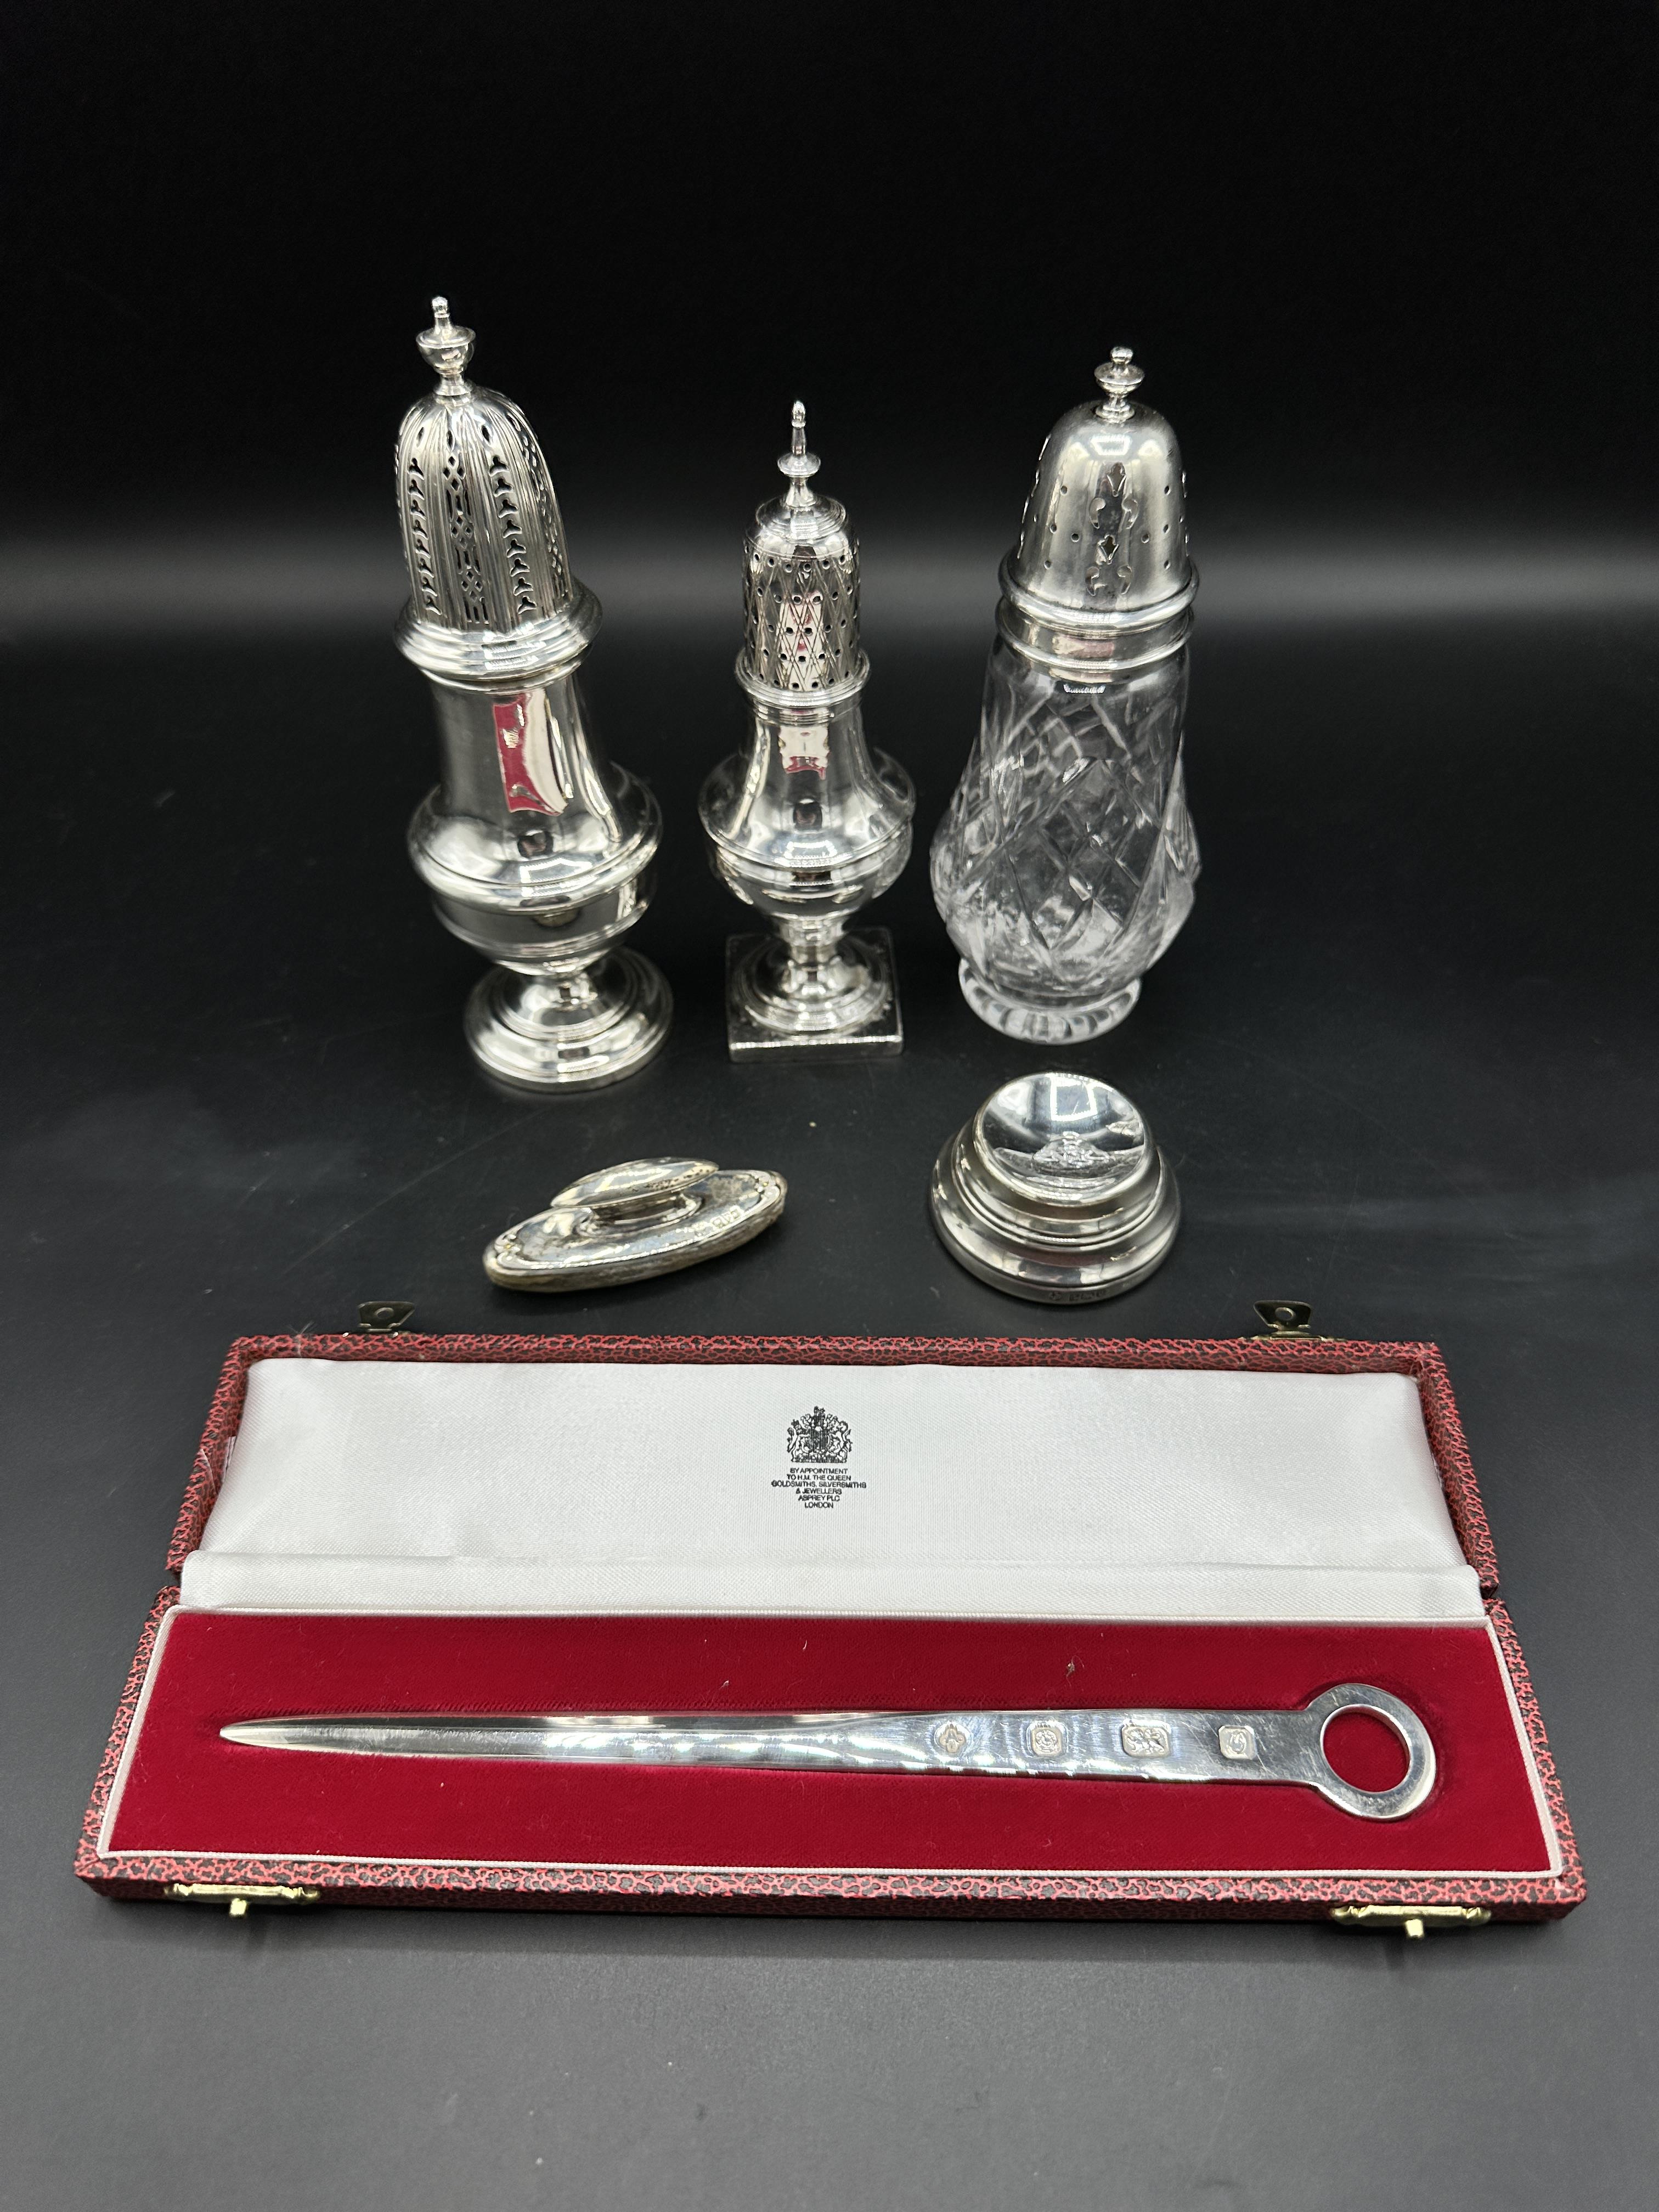 Two silver sugar casters together with a glass and silver sugar caster